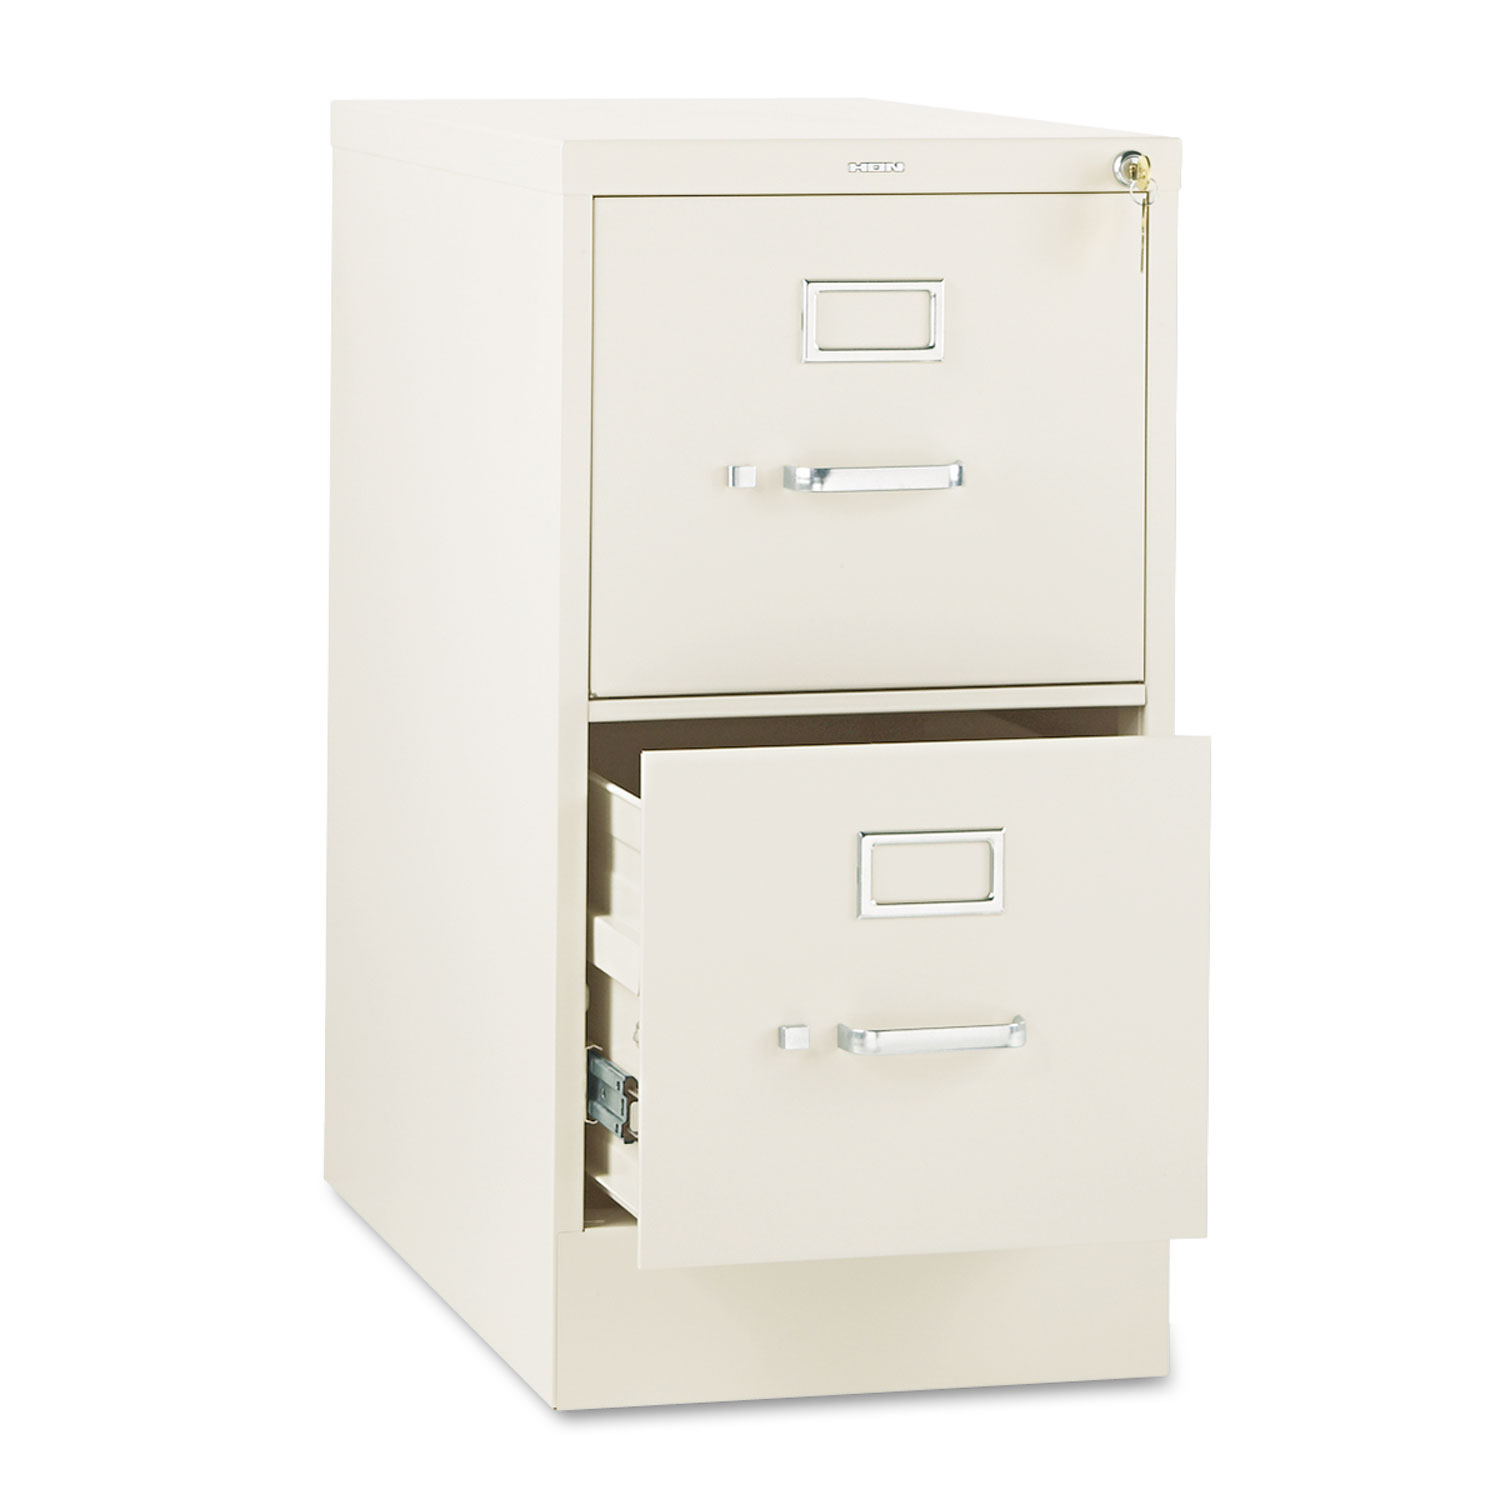 310 Series Two-Drawer, Full-Suspension File, Letter, 26-1/2d, Putty